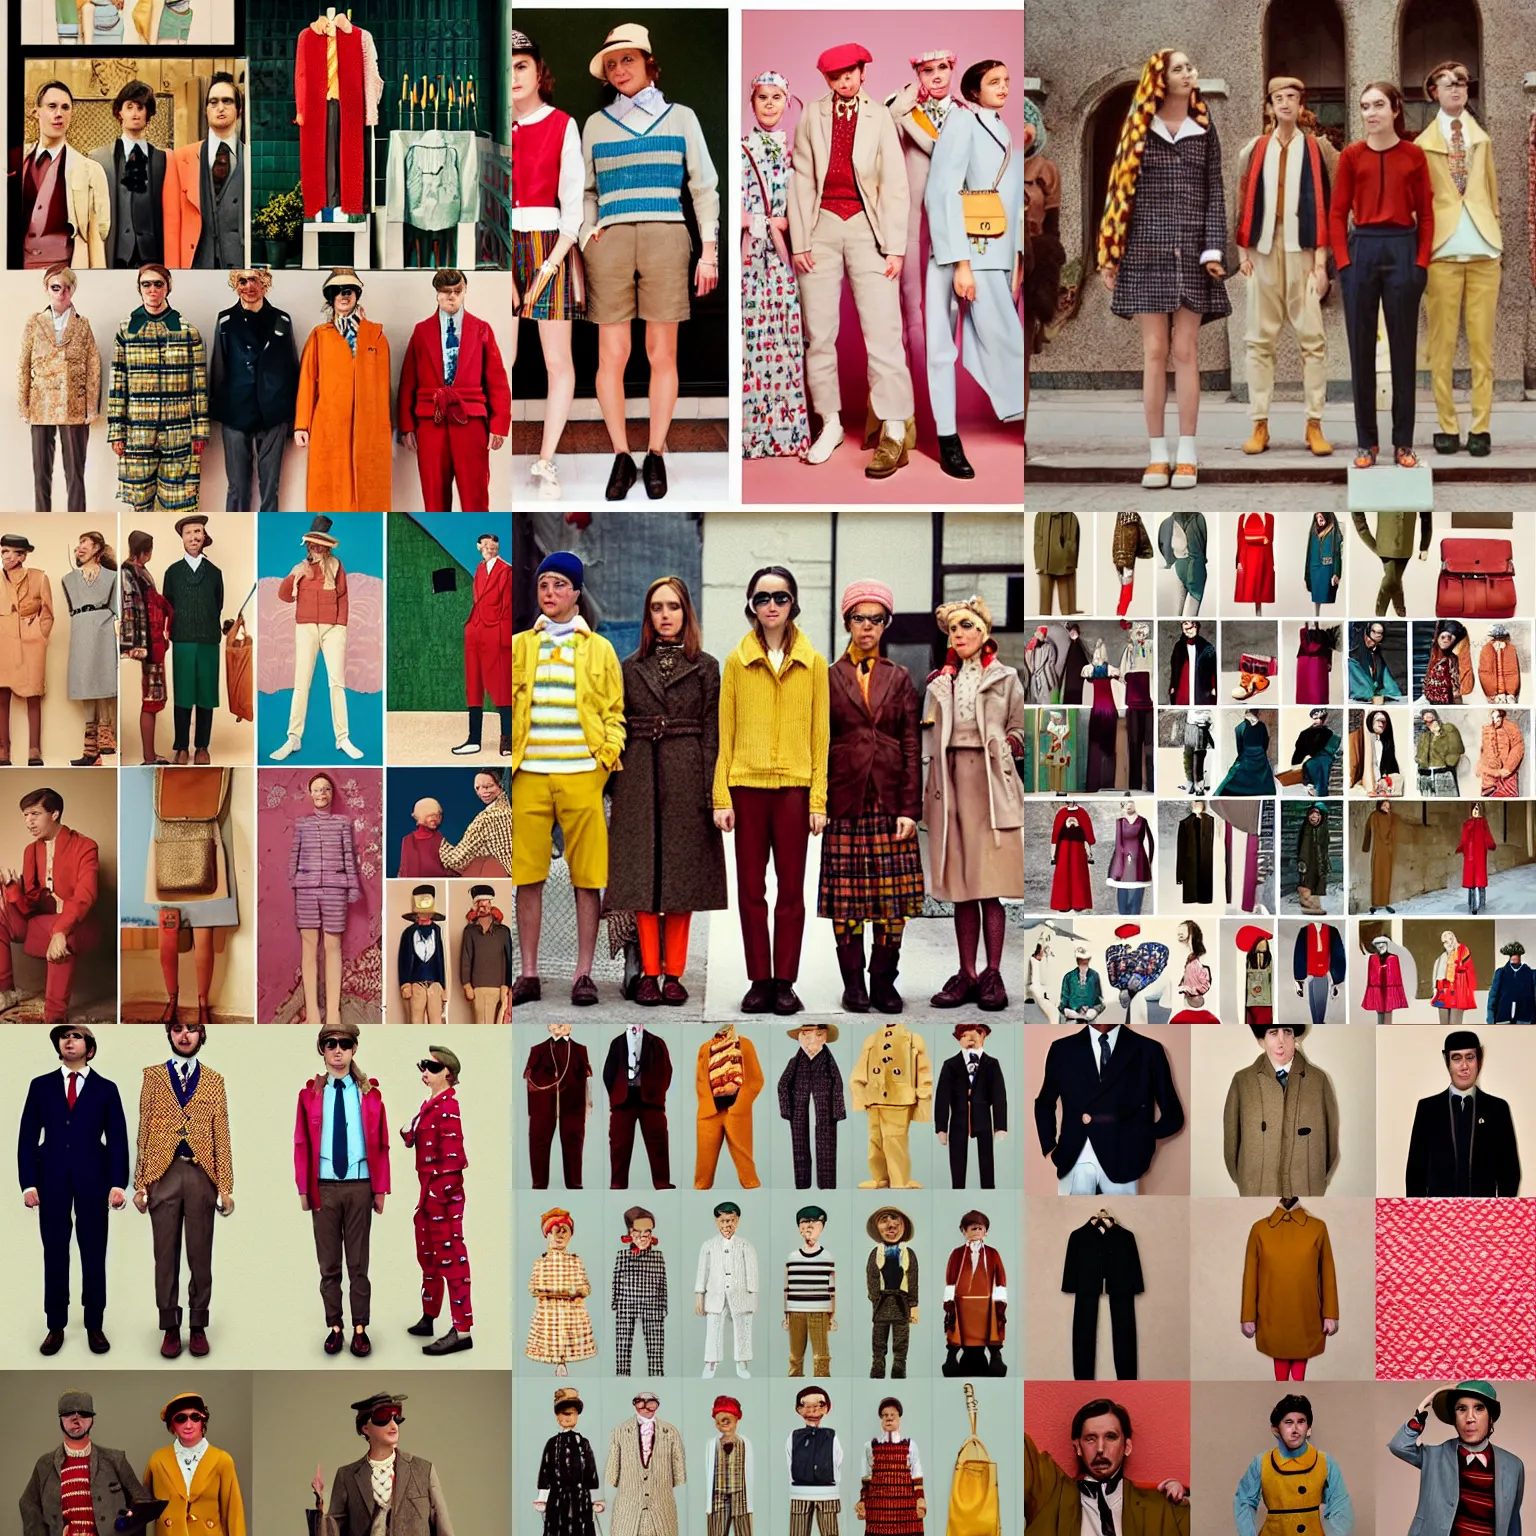 Fashion Collection in the Style of Wes Anderson Made by Midjourney